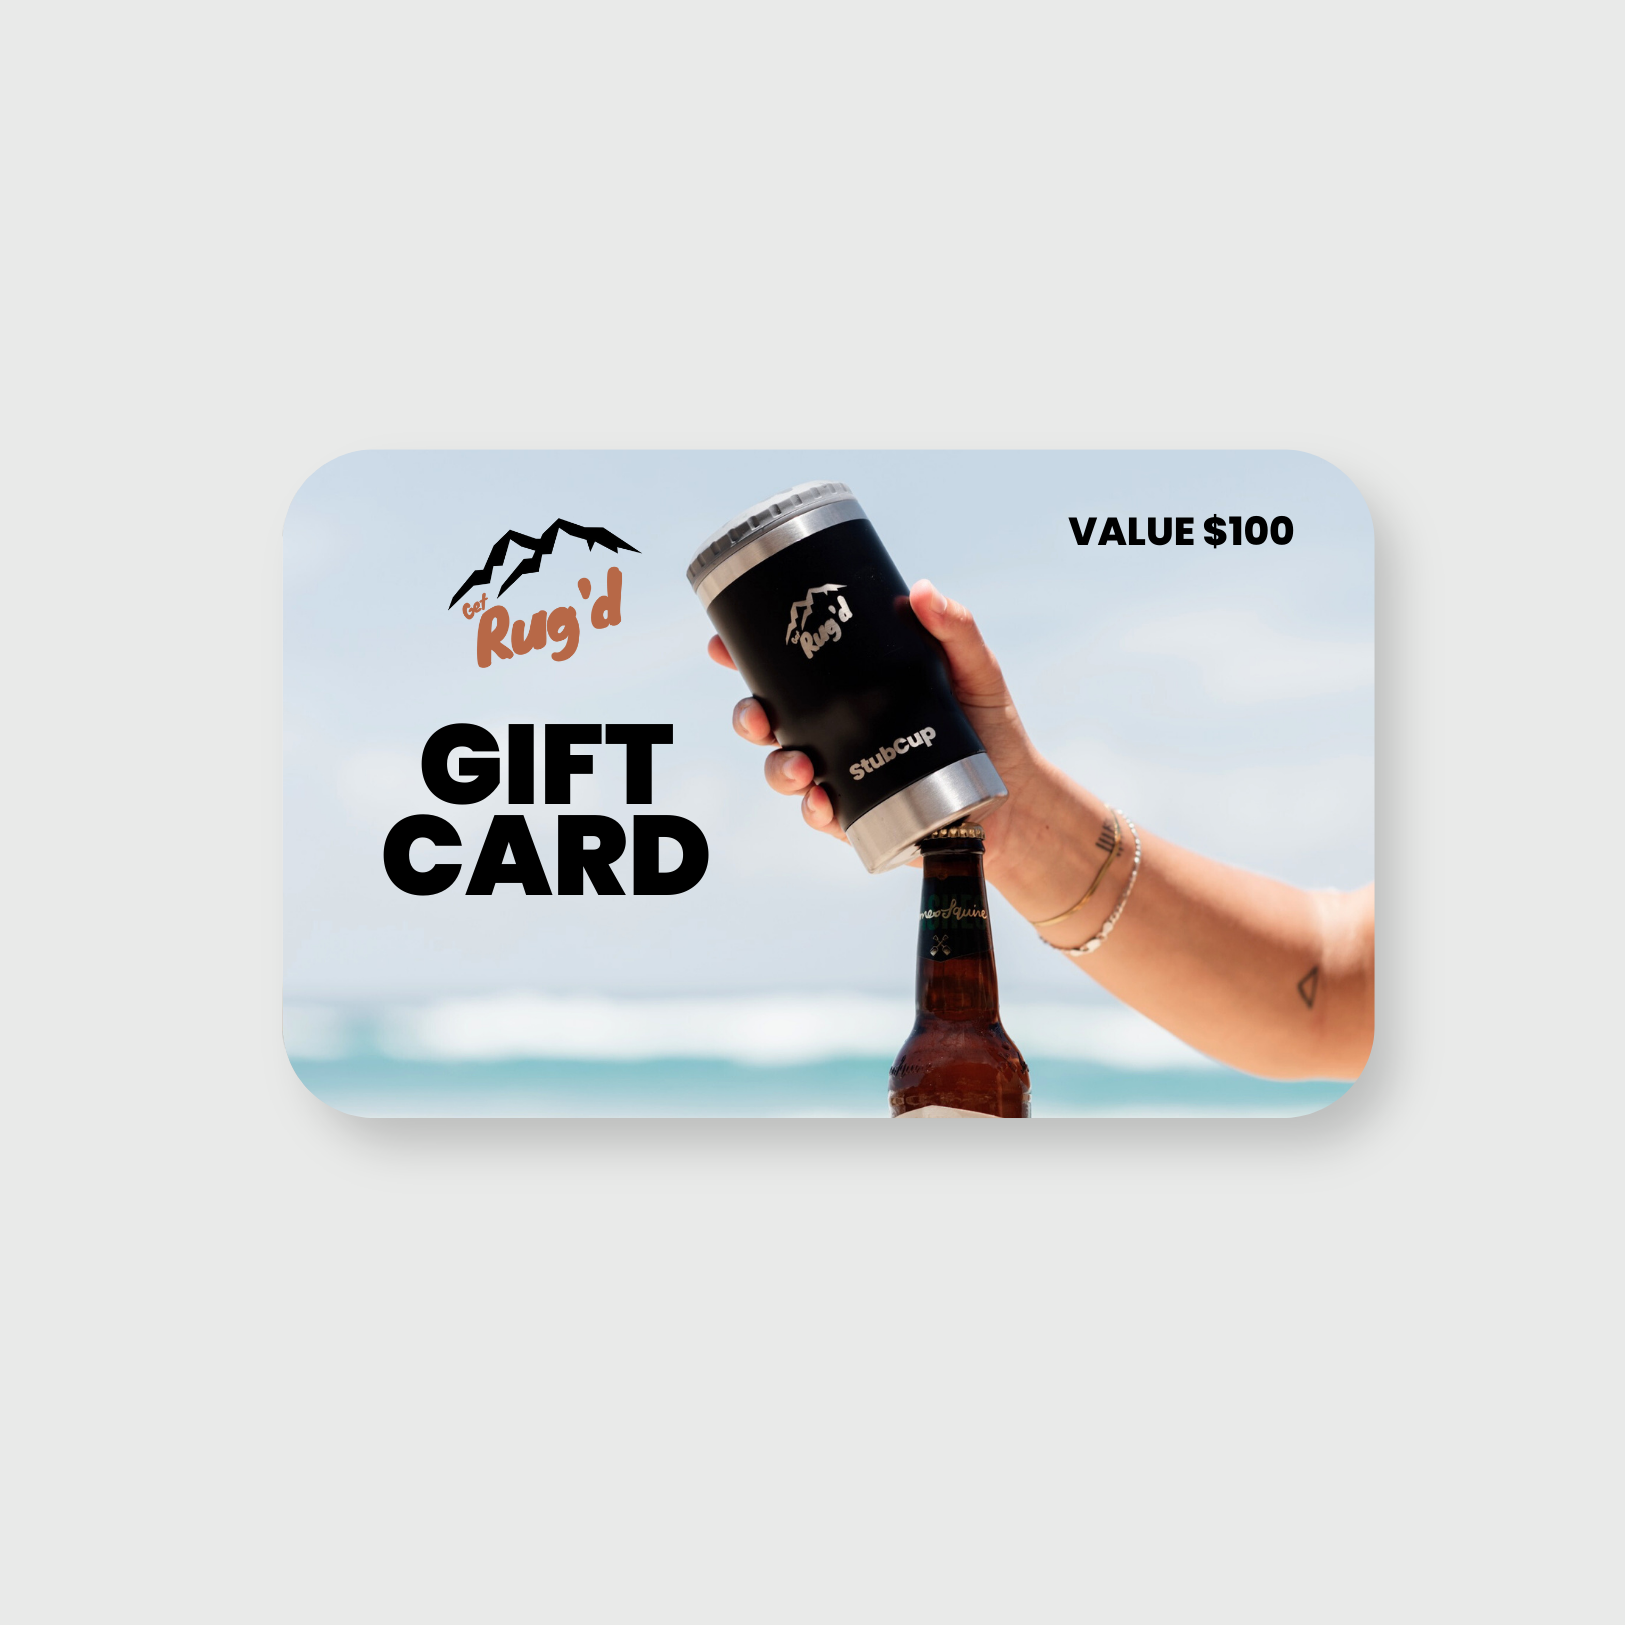 Get-Rugd-Gift-Card-outdoor-gear-stubcup-winter-wear-clothes-fashion-camping-100_321d651c-bc38-456f-904c-b51cb76c605b.png